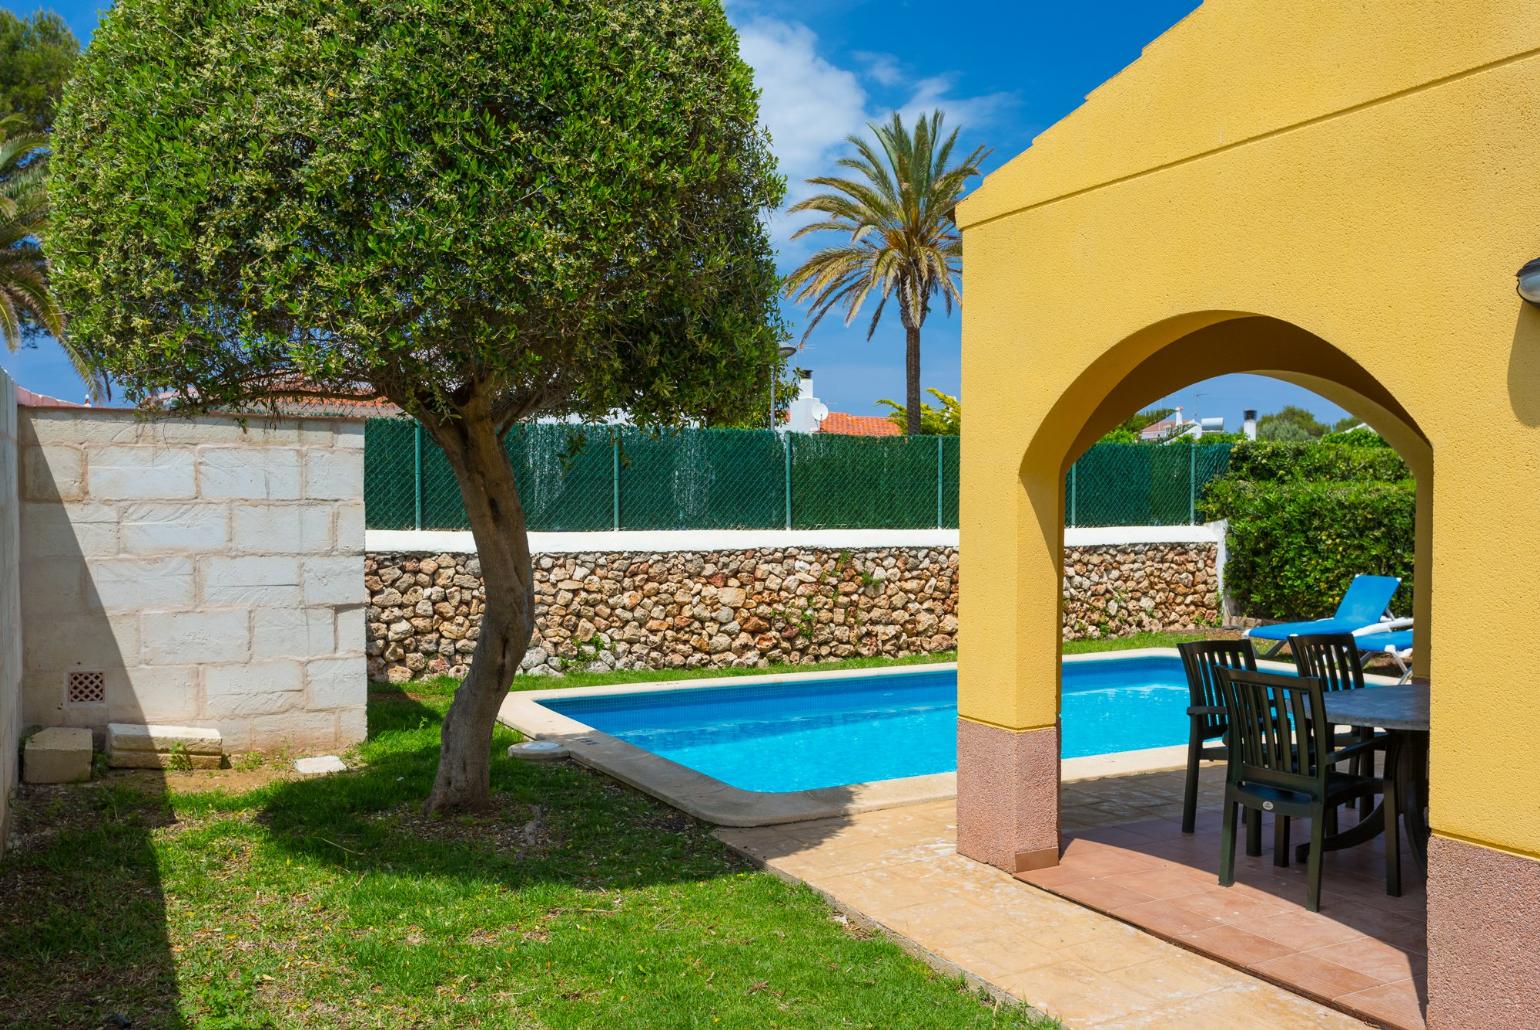 Beautiful villa with private pool and sheltered terrace area